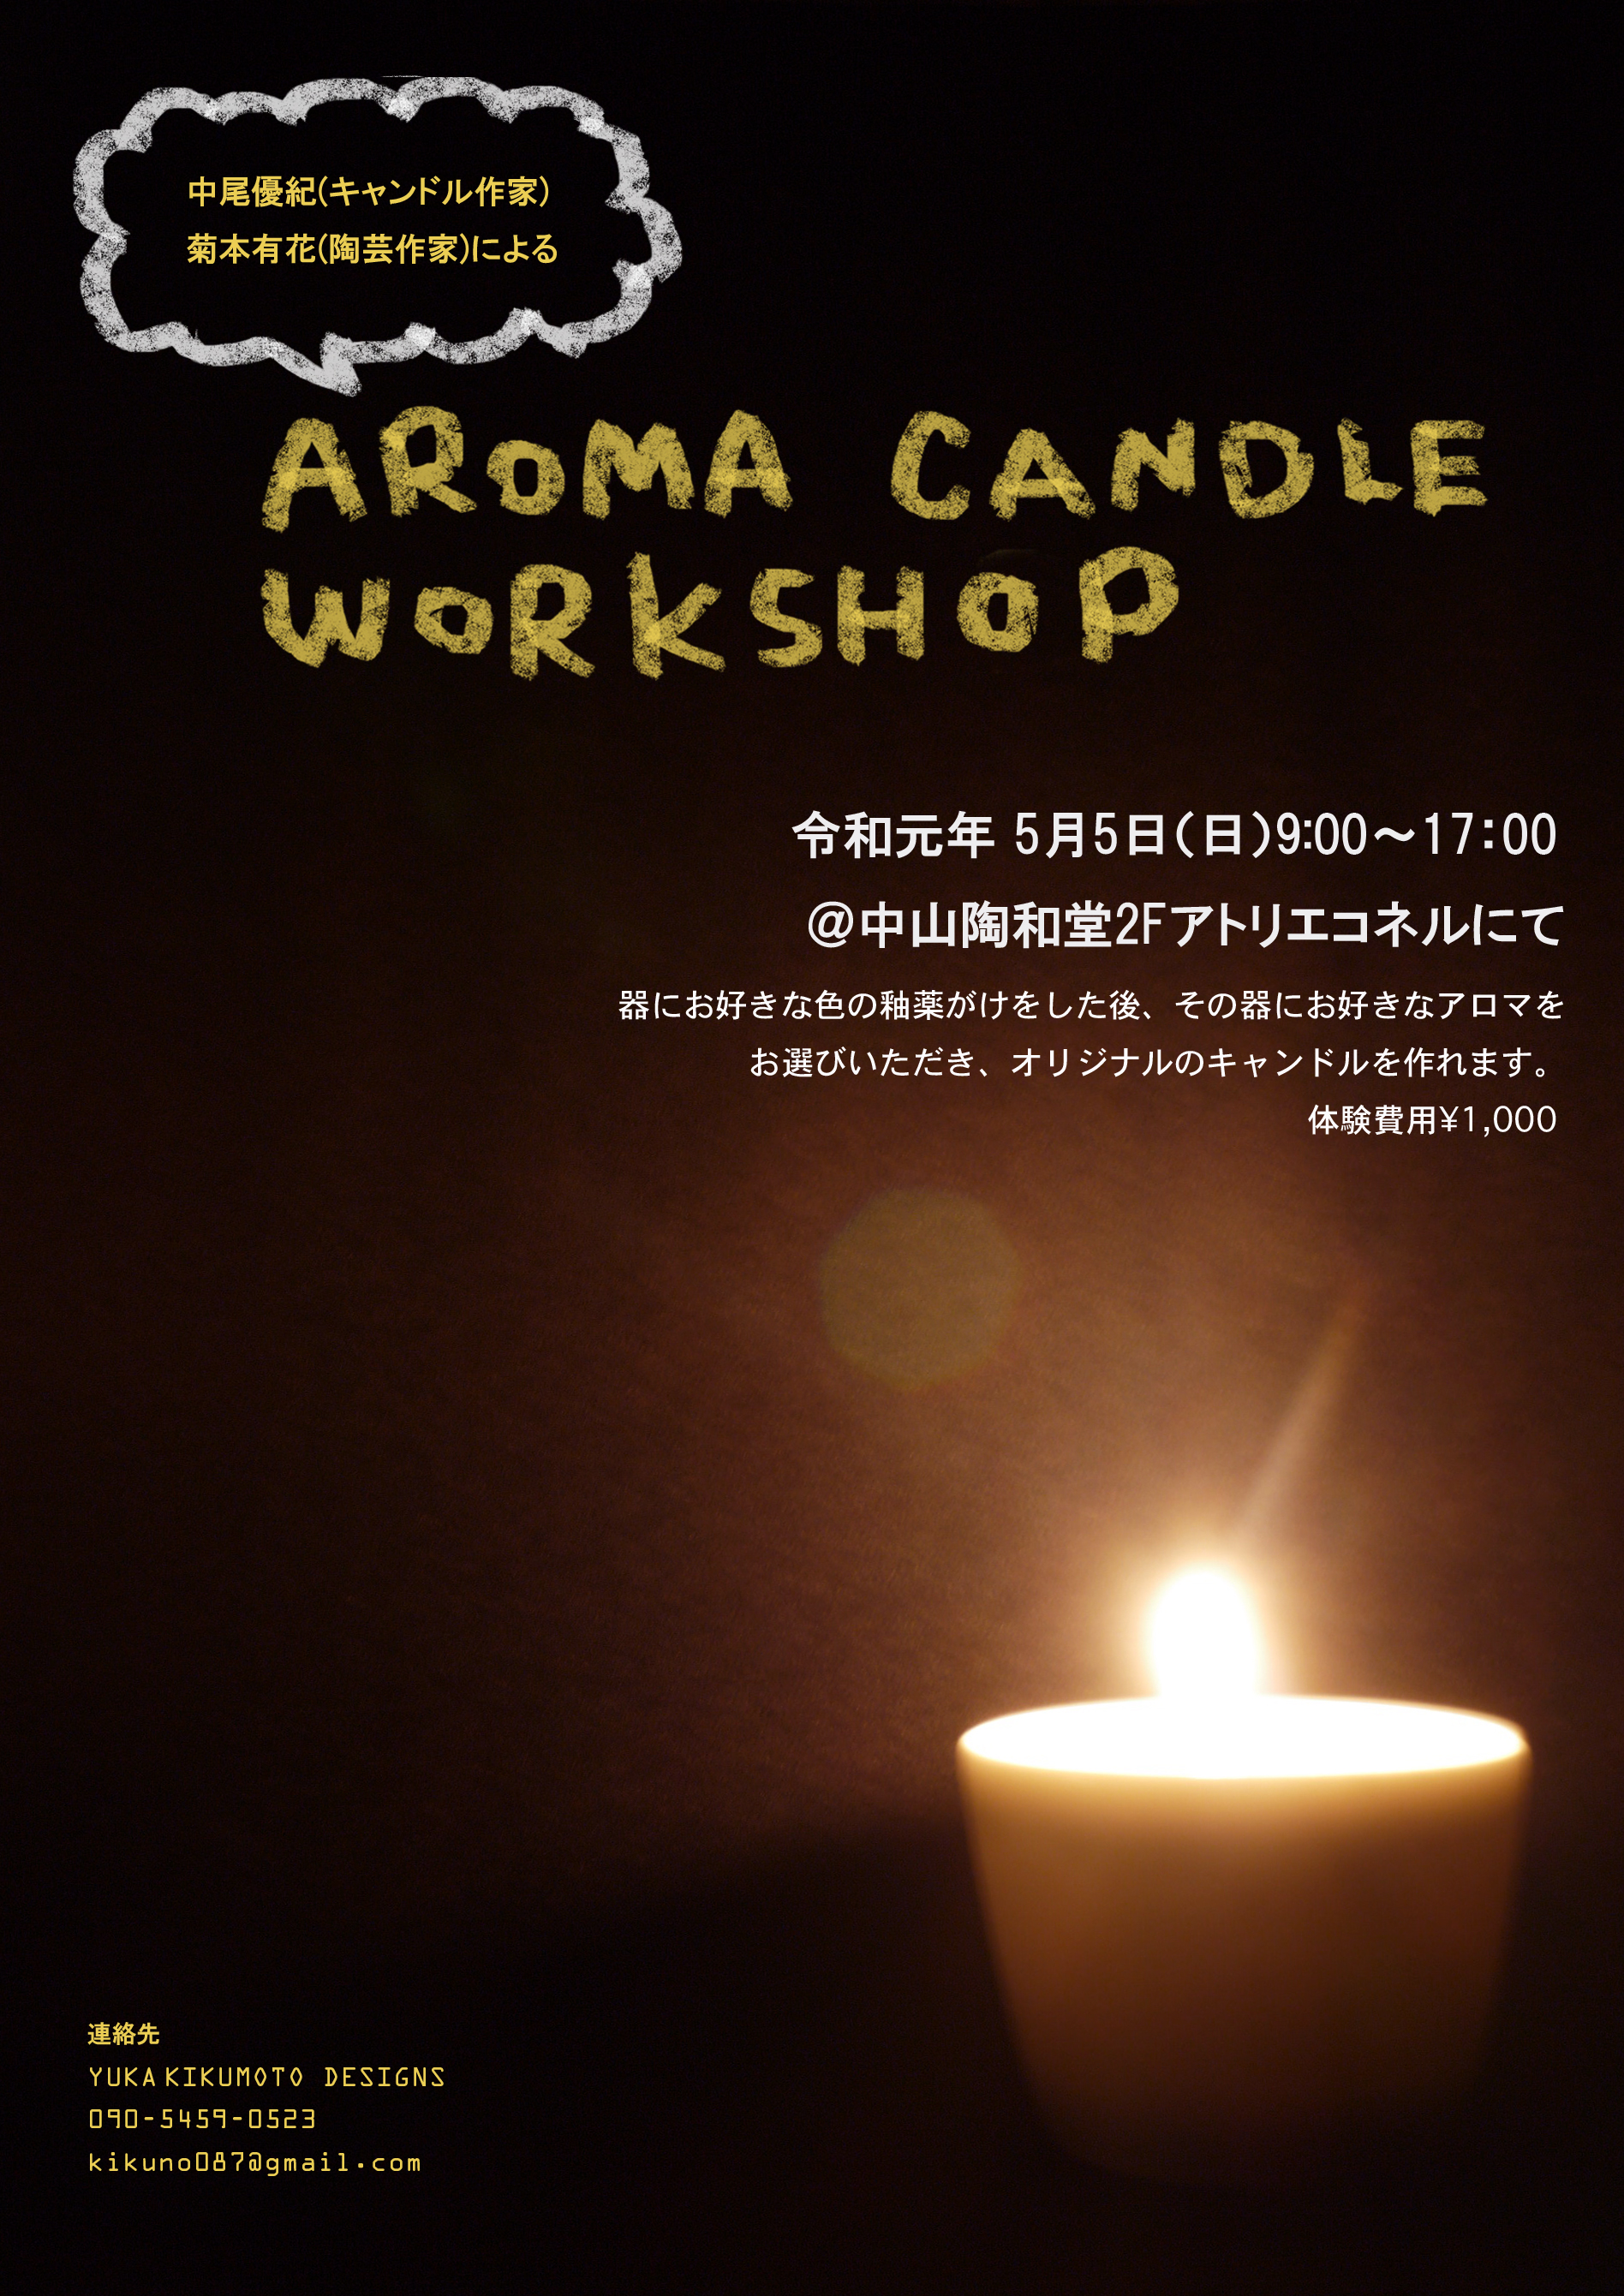 Aroma Candle Workshop